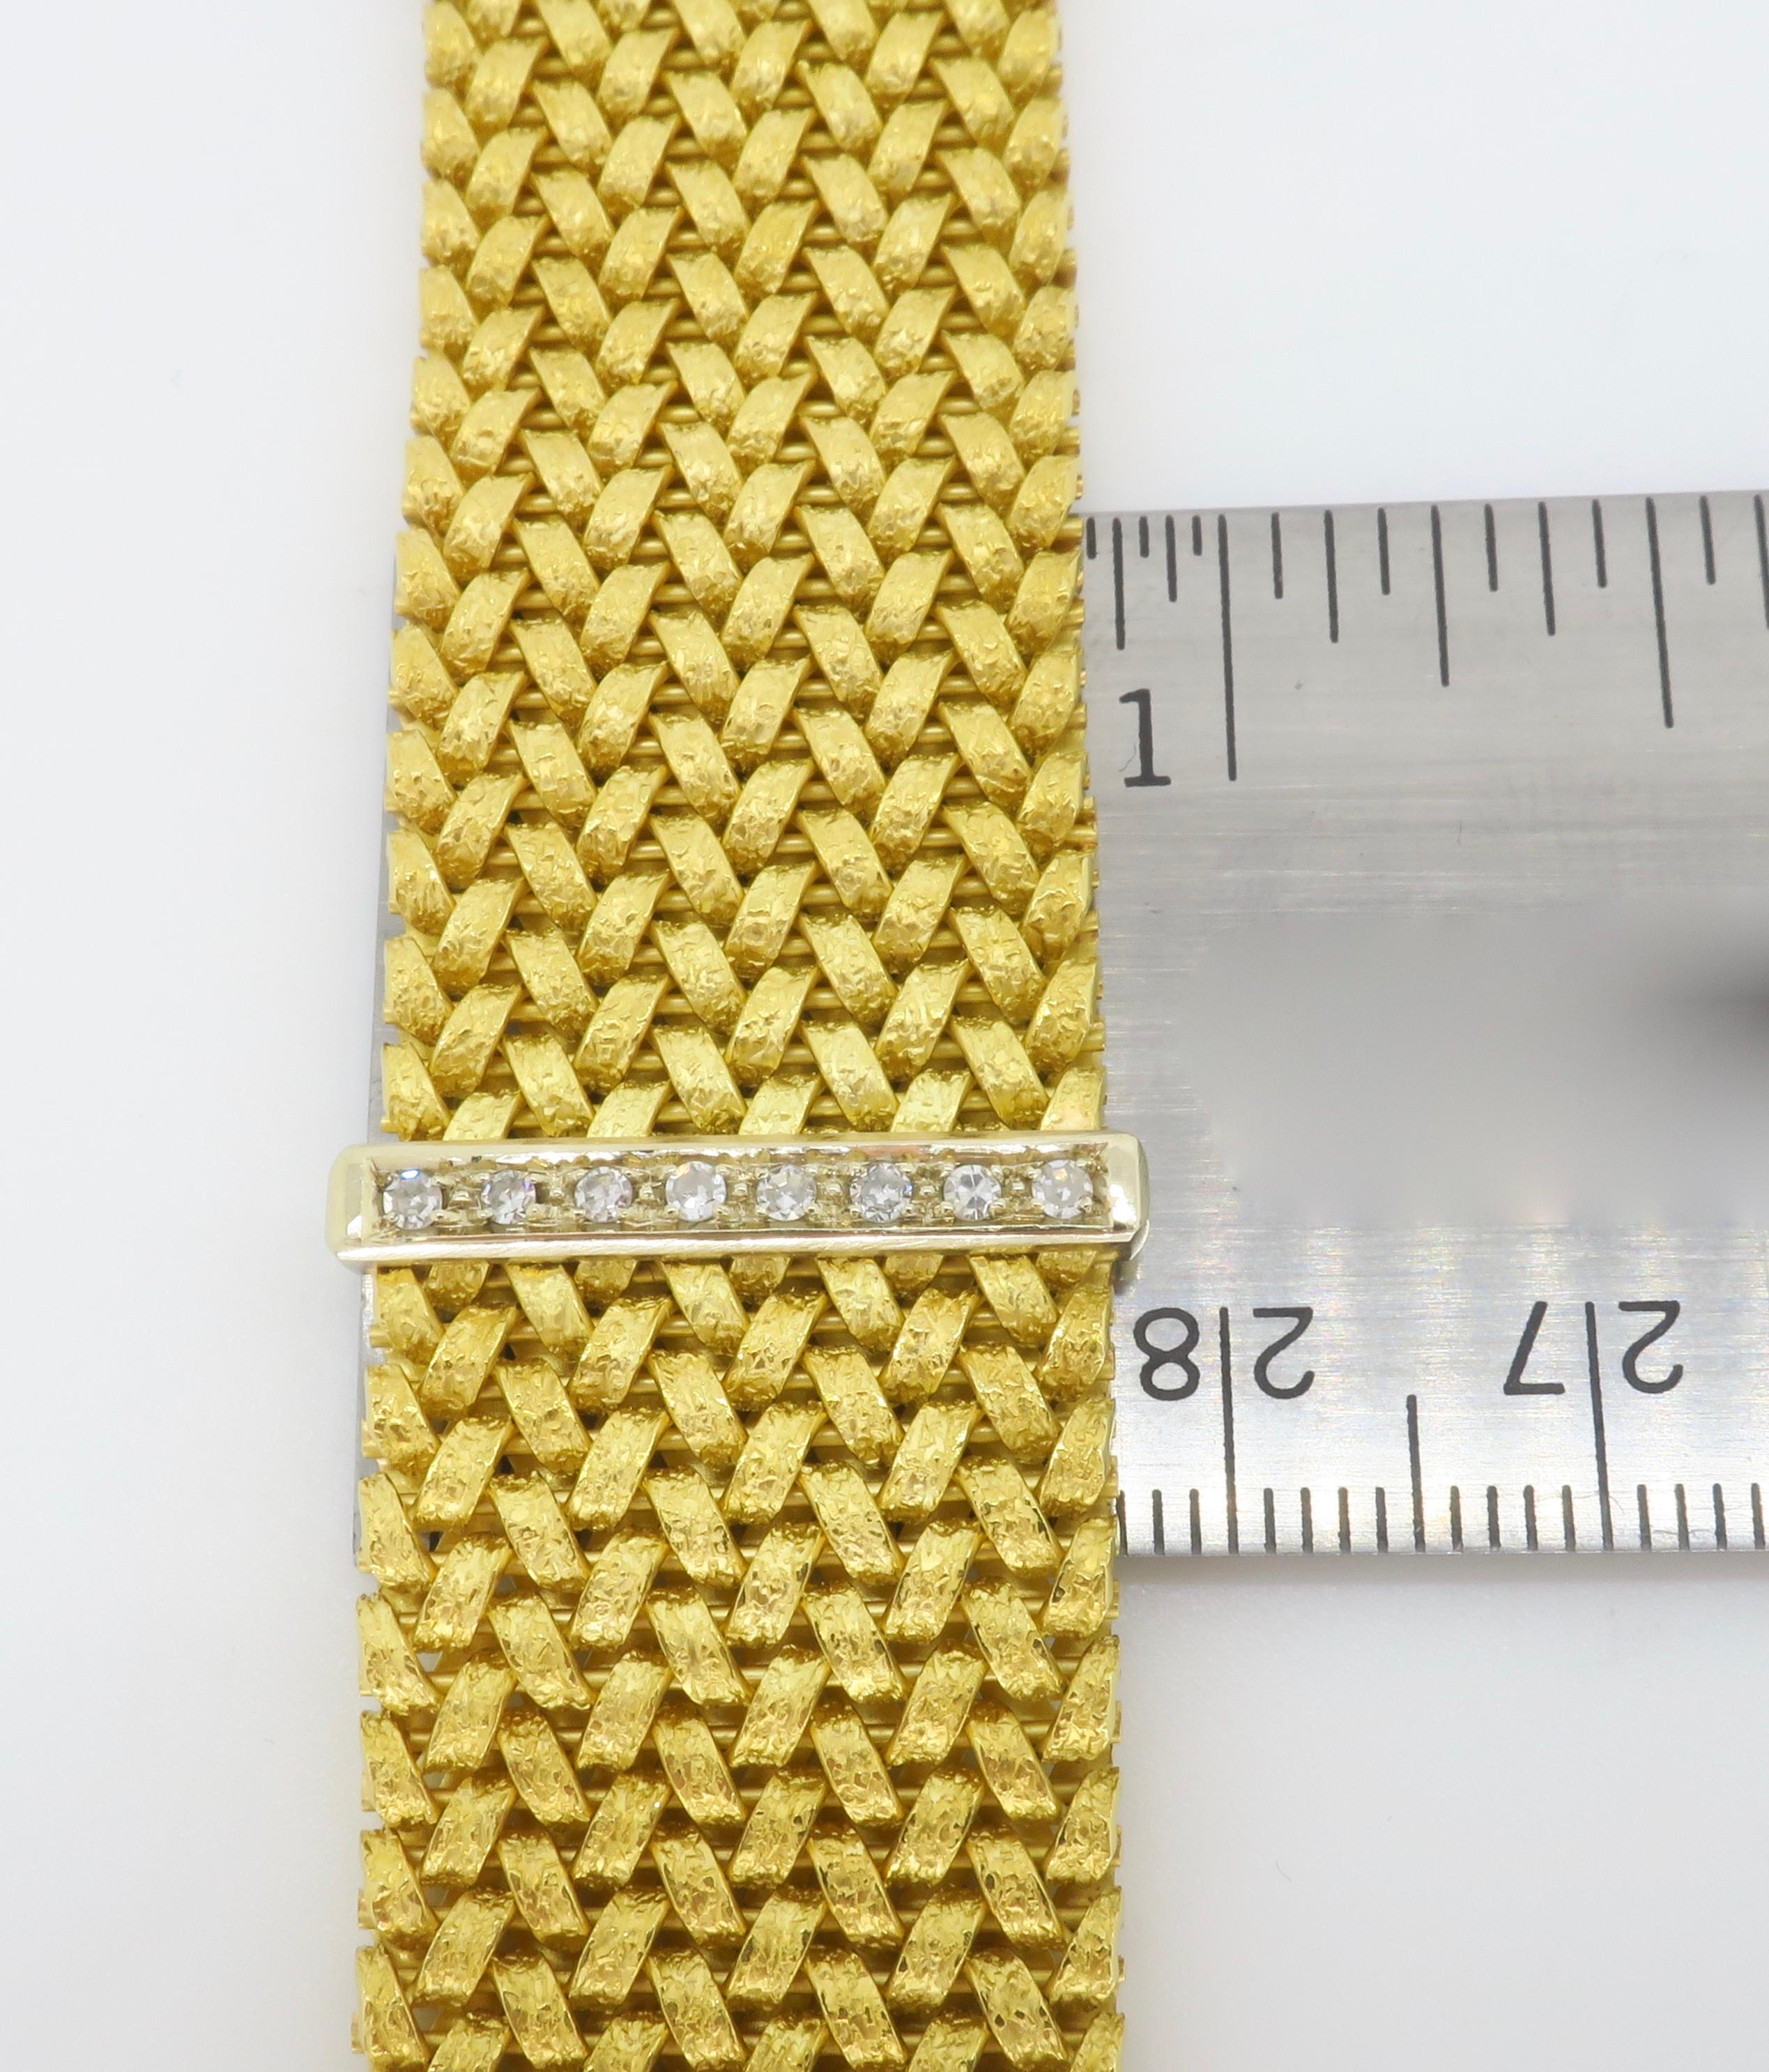 Intricate Mesh Bracelet Made in 18k Yellow Gold with Diamonds 5